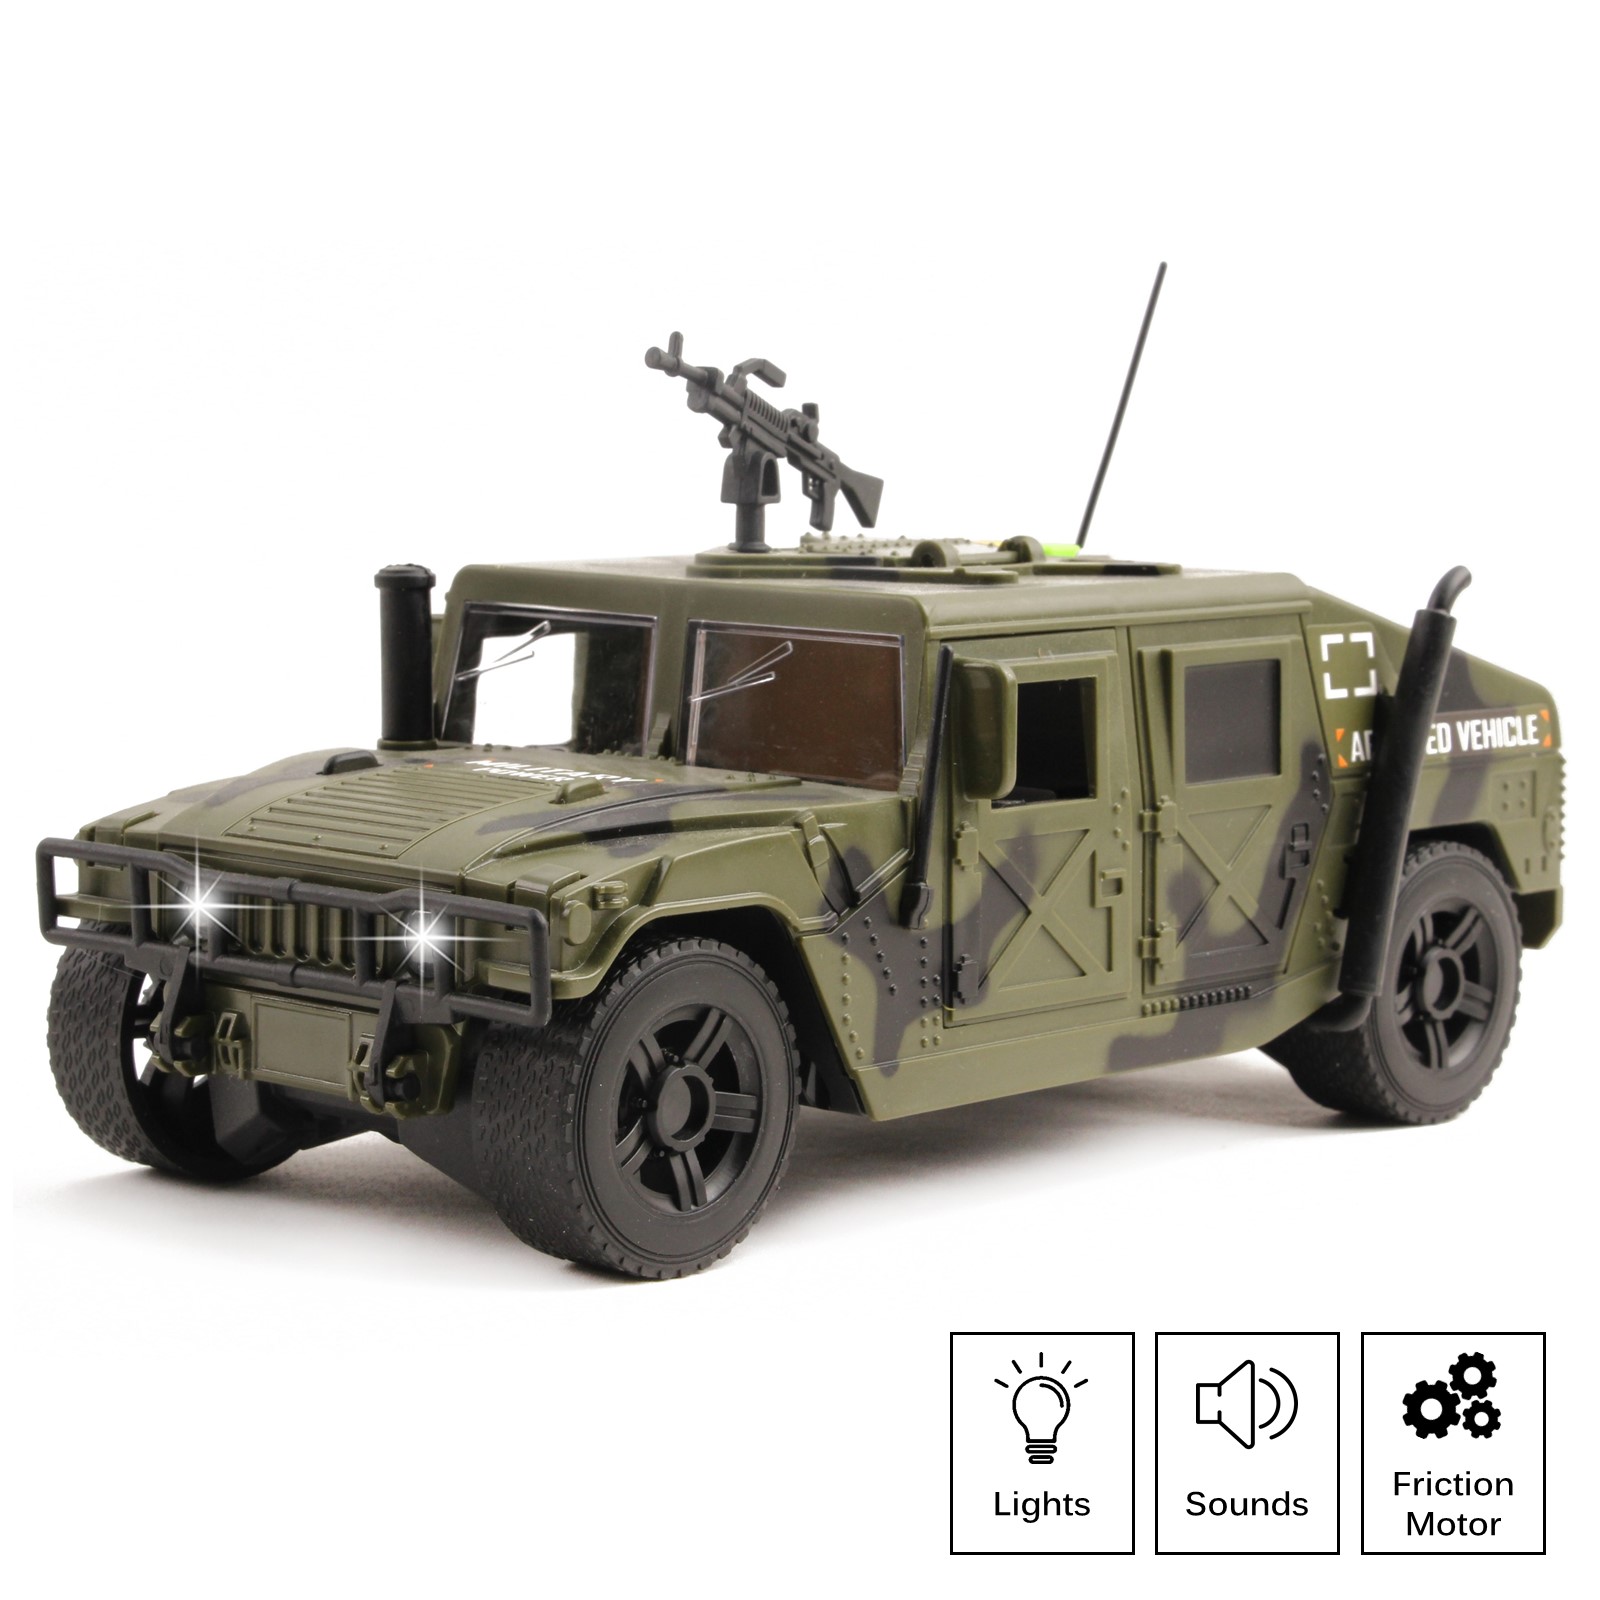 Military Fighter Truck Friction Powered With Lights And Sounds Kids Push And Go 1:16 Scale Pretend Play Armored Army Vehicle Doors Open Quality Action Toy Car Great Gift For Children Boys Girls